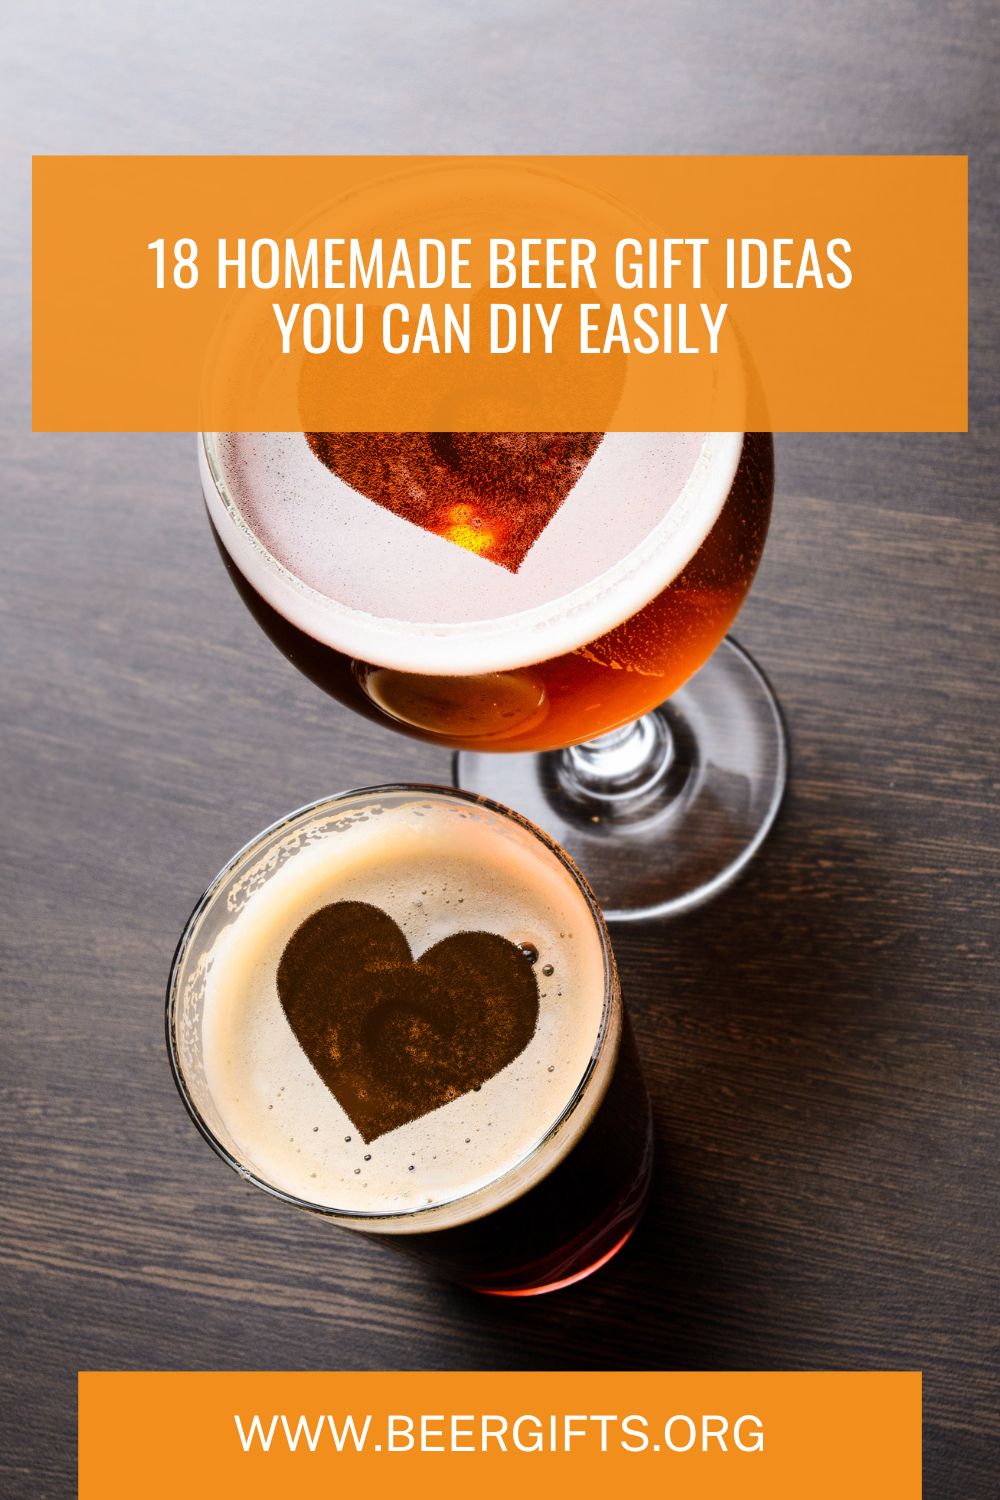 18 Homemade Beer Gift Ideas You Can DIY Easily 9